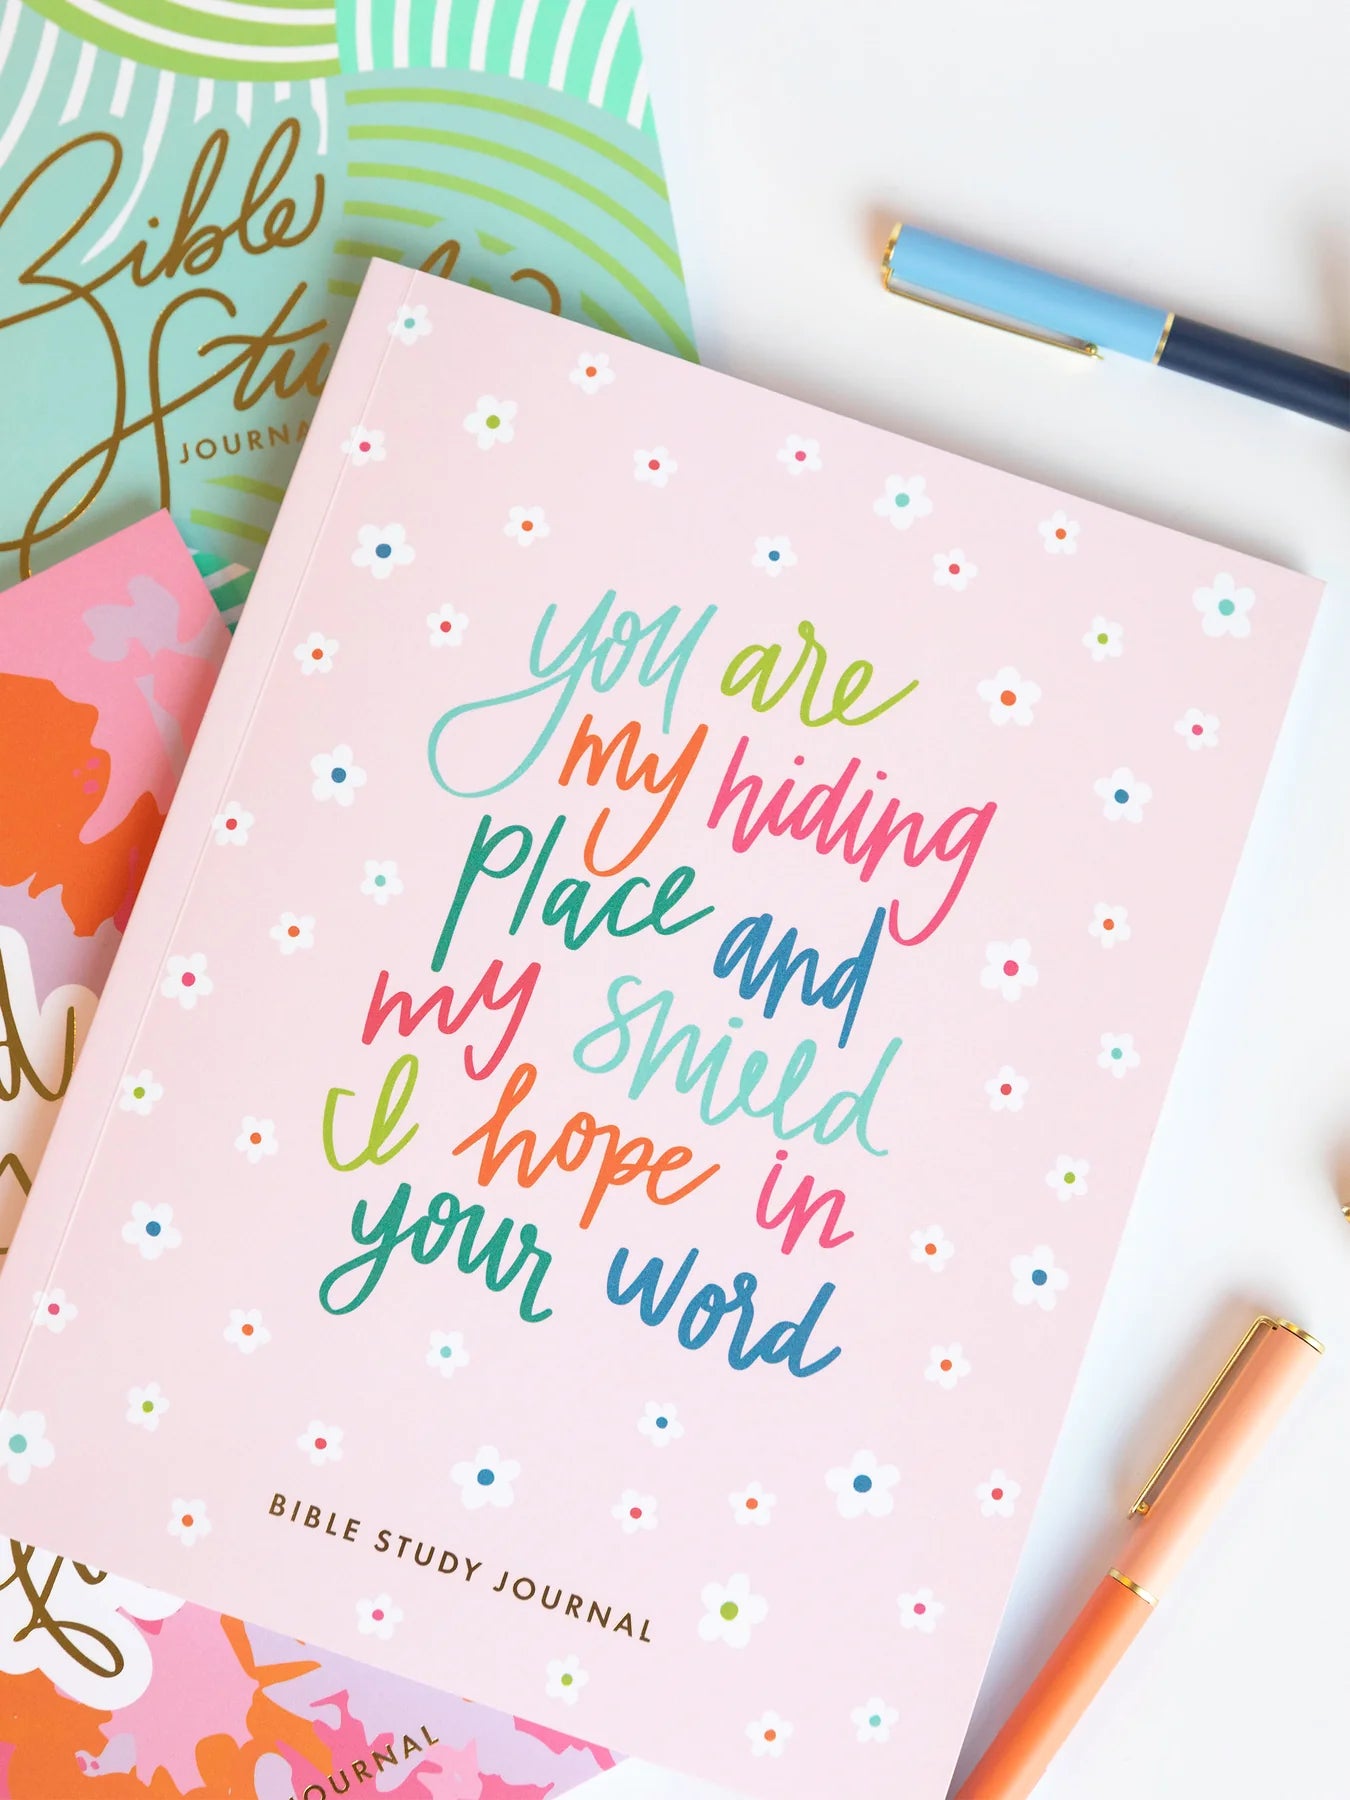 Mary Square Bible Study Journal | Hope in Your Word